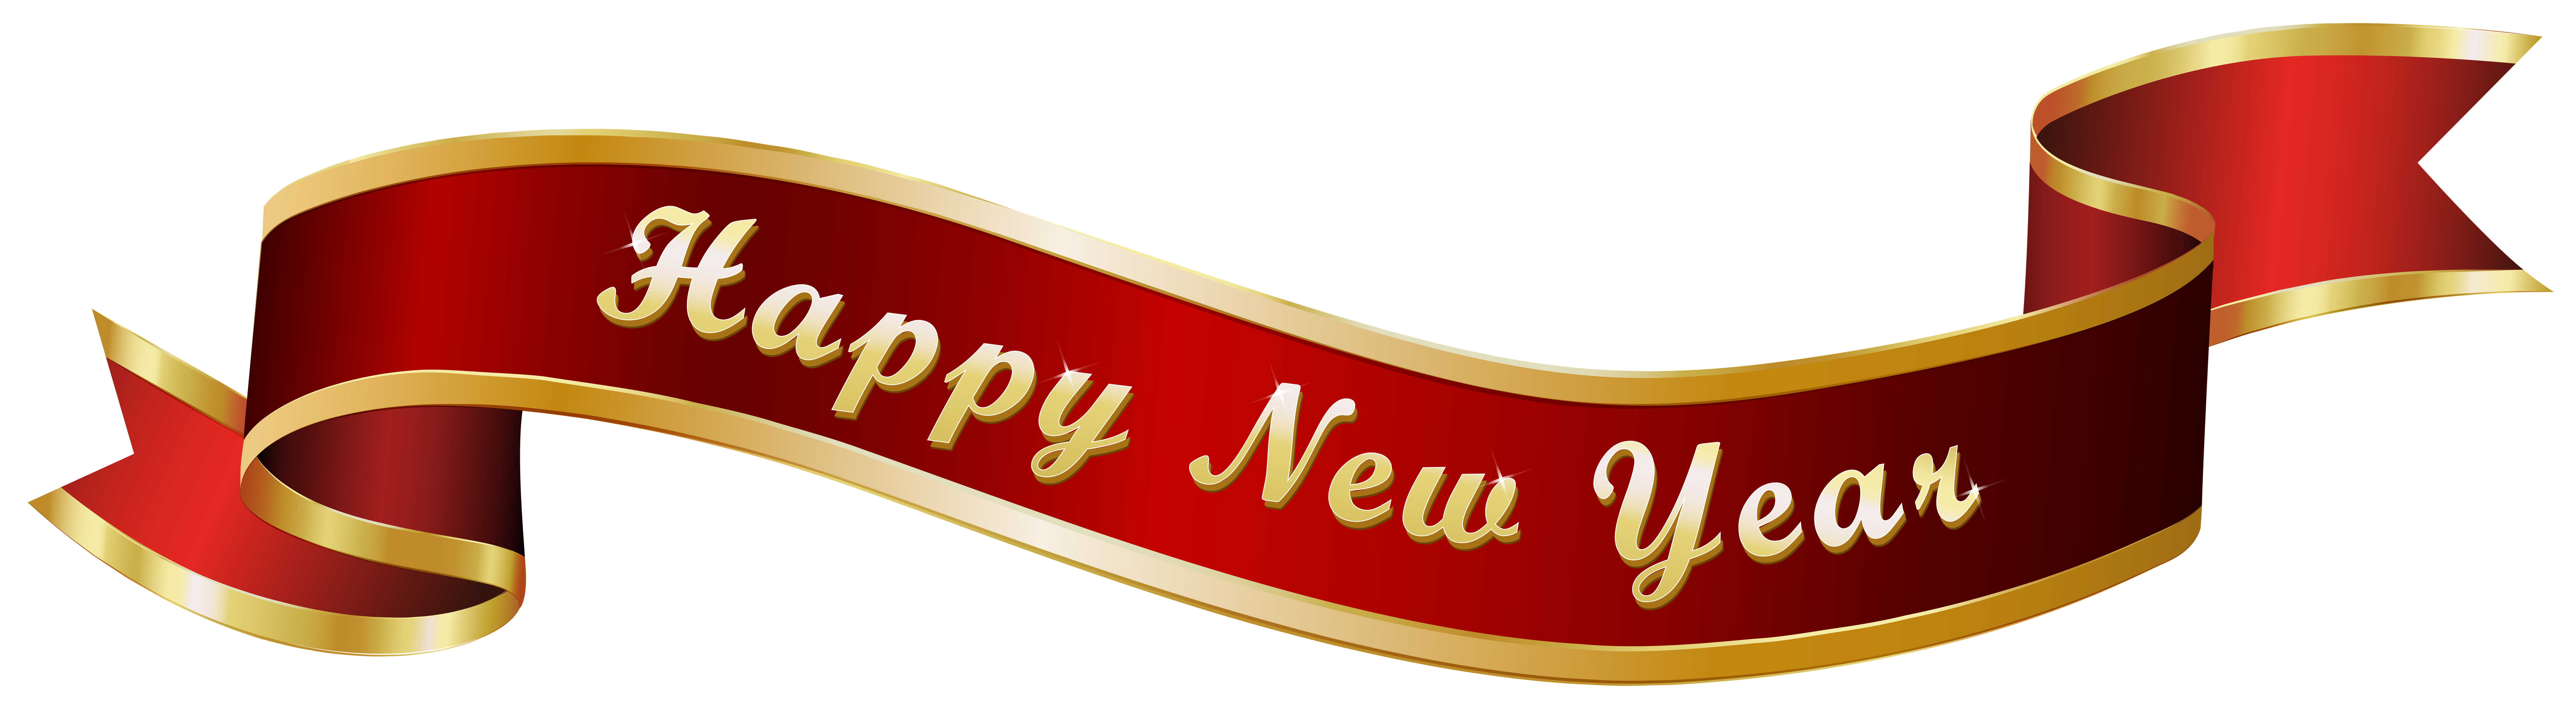 Happy new year png images | Klipartz